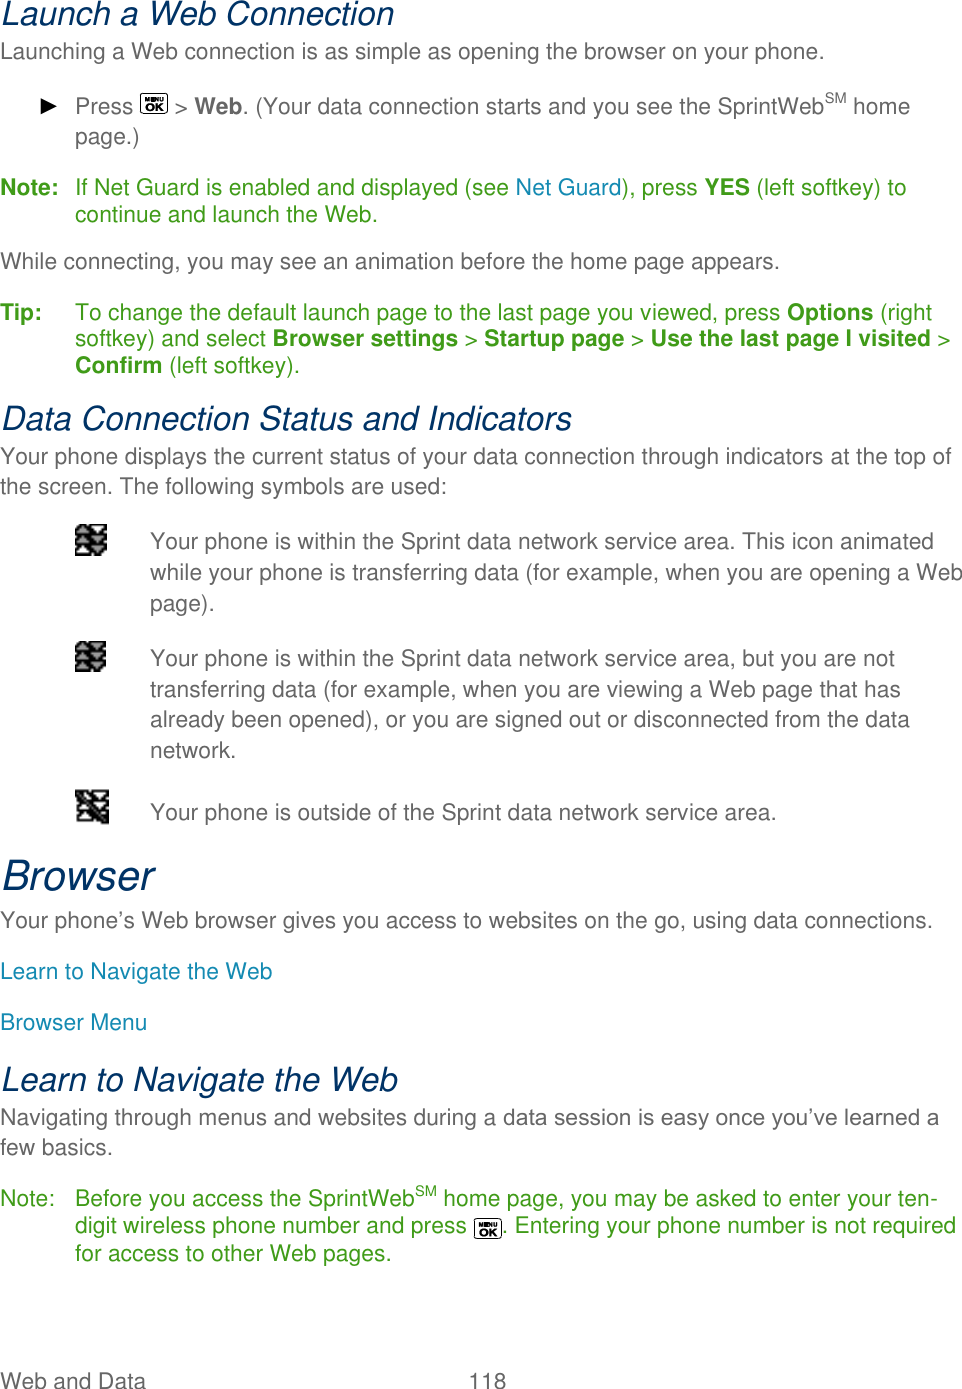  Web and Data   118   Launch a Web Connection Launching a Web connection is as simple as opening the browser on your phone. ► Press   &gt; Web. (Your data connection starts and you see the SprintWebSM home page.) Note:  If Net Guard is enabled and displayed (see Net Guard), press YES (left softkey) to continue and launch the Web. While connecting, you may see an animation before the home page appears.  Tip:   To change the default launch page to the last page you viewed, press Options (right softkey) and select Browser settings &gt; Startup page &gt; Use the last page I visited &gt; Confirm (left softkey). Data Connection Status and Indicators Your phone displays the current status of your data connection through indicators at the top of the screen. The following symbols are used:   Your phone is within the Sprint data network service area. This icon animated while your phone is transferring data (for example, when you are opening a Web page).   Your phone is within the Sprint data network service area, but you are not transferring data (for example, when you are viewing a Web page that has already been opened), or you are signed out or disconnected from the data network.   Your phone is outside of the Sprint data network service area. Browser Your phone’s Web browser gives you access to websites on the go, using data connections. Learn to Navigate the Web Browser Menu Learn to Navigate the Web Navigating through menus and websites during a data session is easy once you’ve learned a few basics. Note:  Before you access the SprintWebSM home page, you may be asked to enter your ten-digit wireless phone number and press  . Entering your phone number is not required for access to other Web pages. 